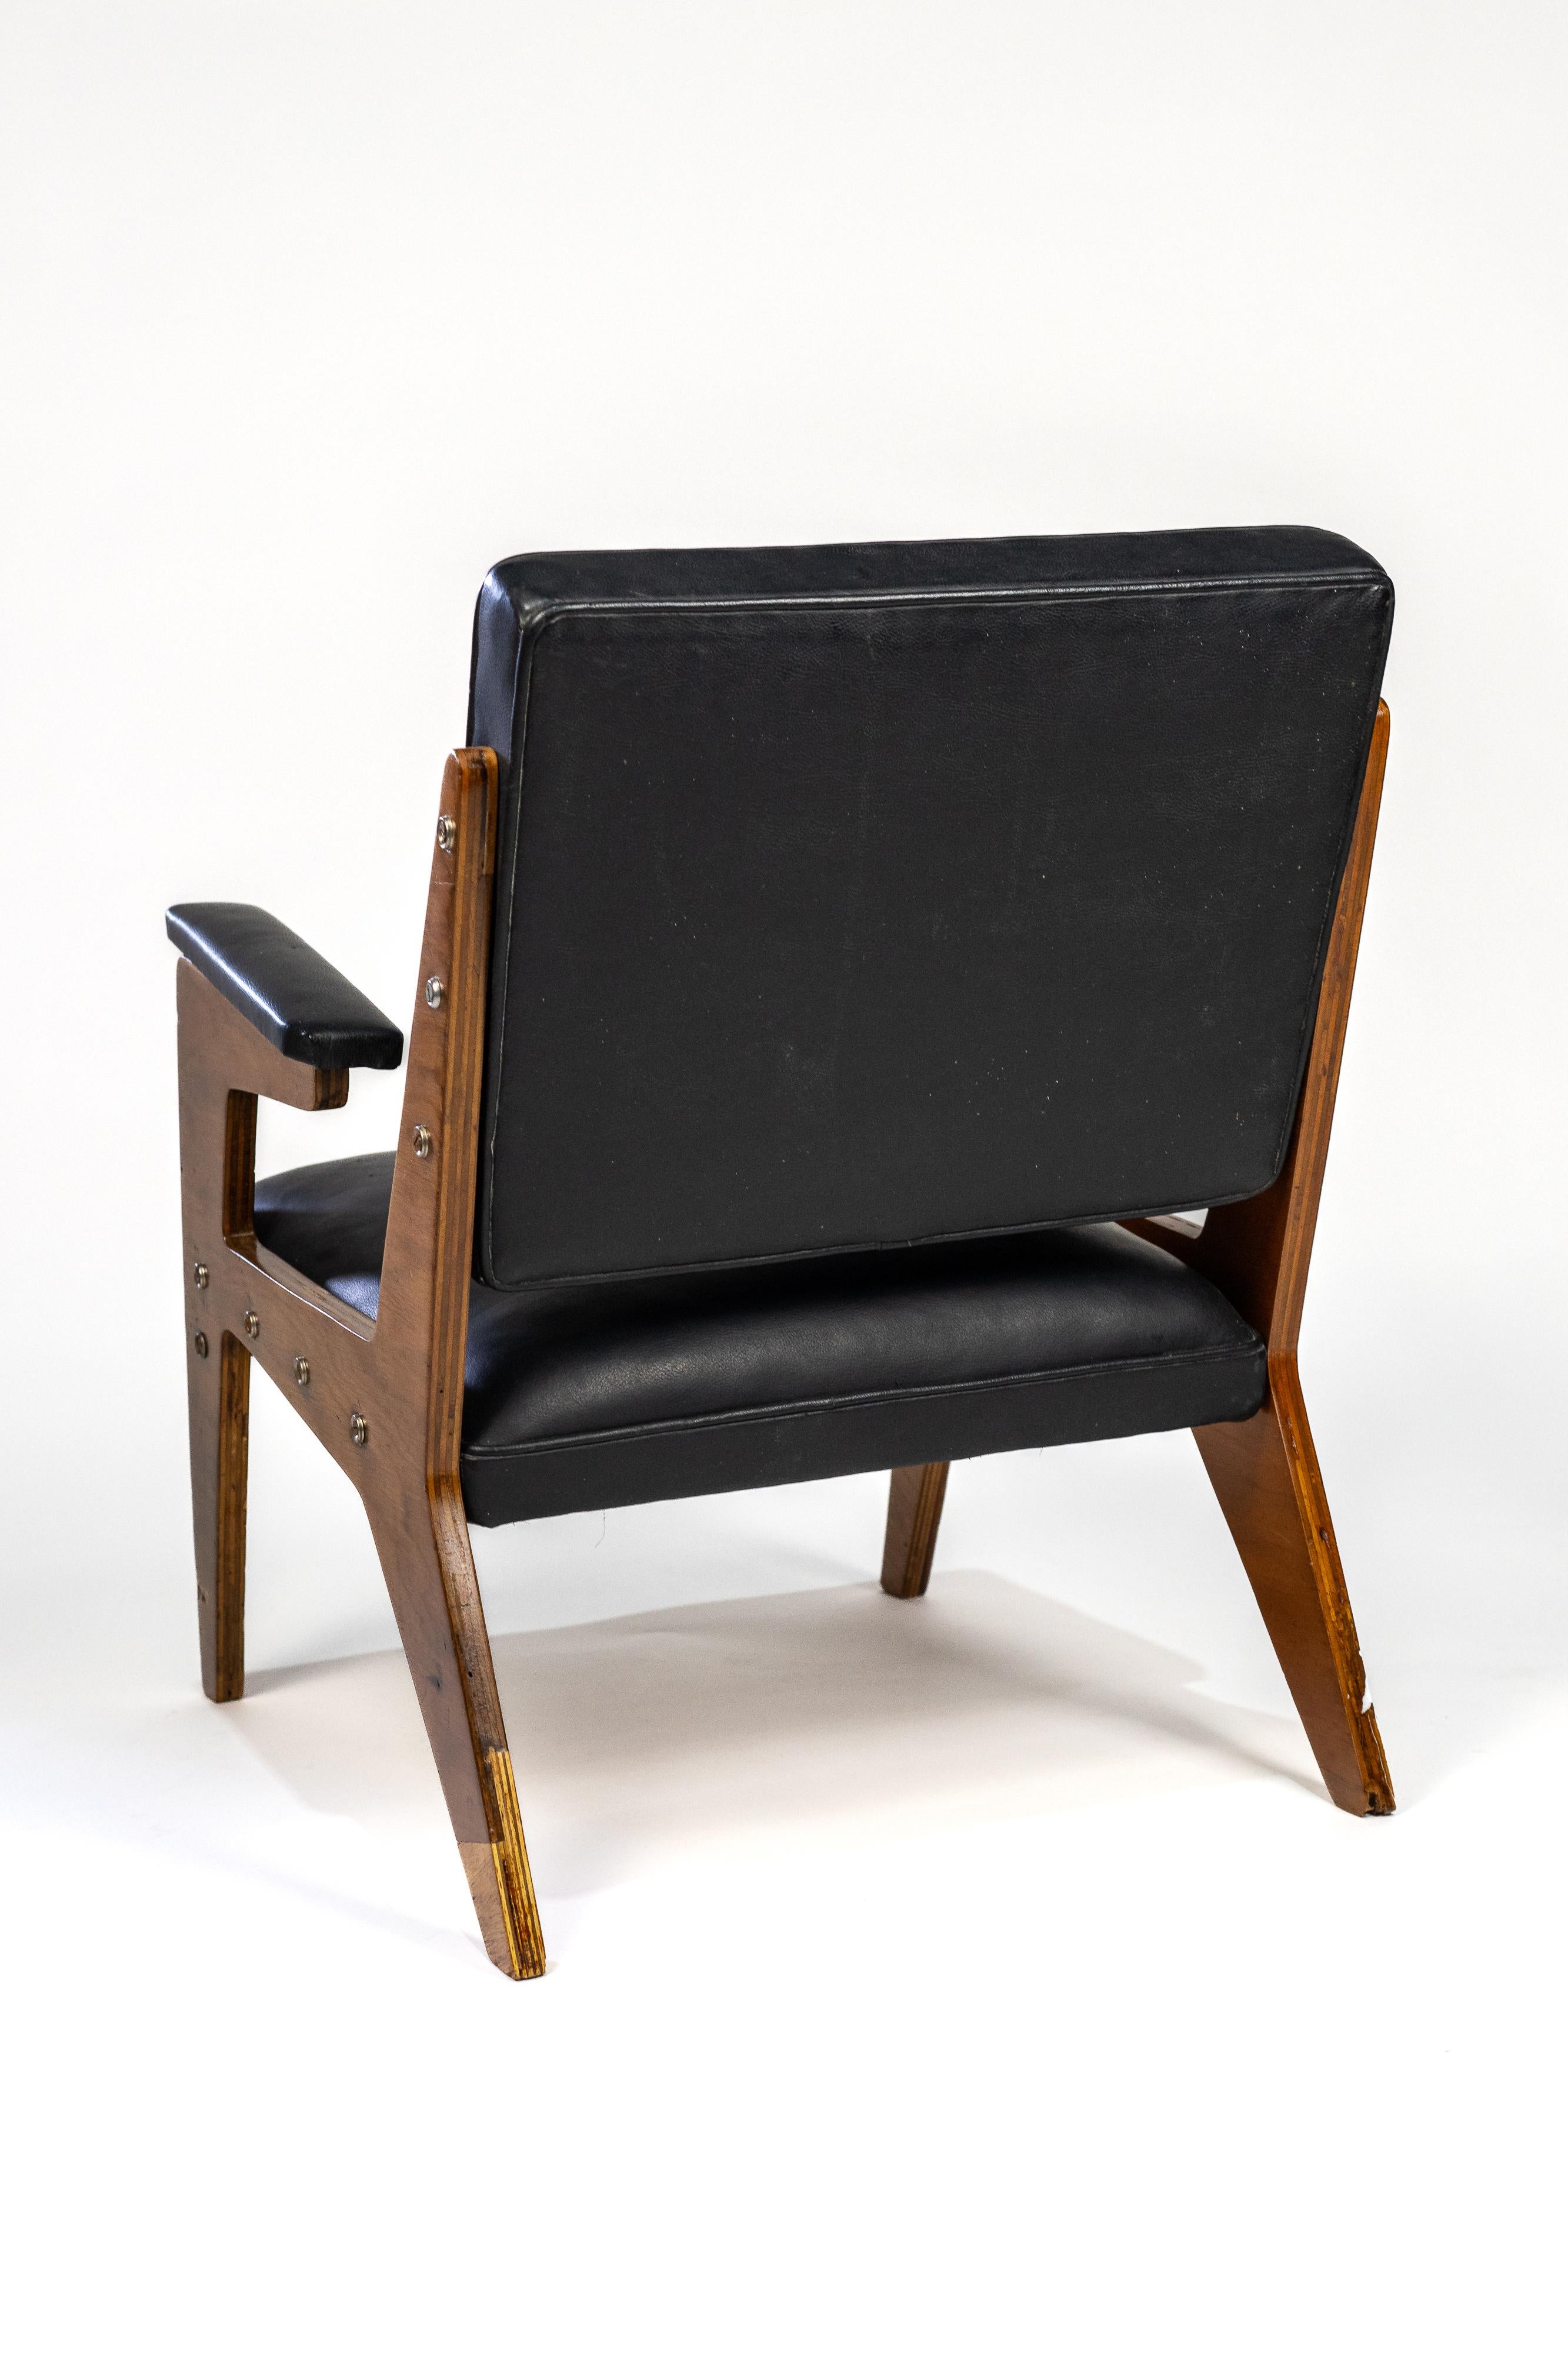 This plywood and imitation leather chair is a testimony to the creativity of José Zanine Caldas in the 1950s.

The choice of plywood that he particularly likes during this decade allows him to give free rein to his playful drawings giving this